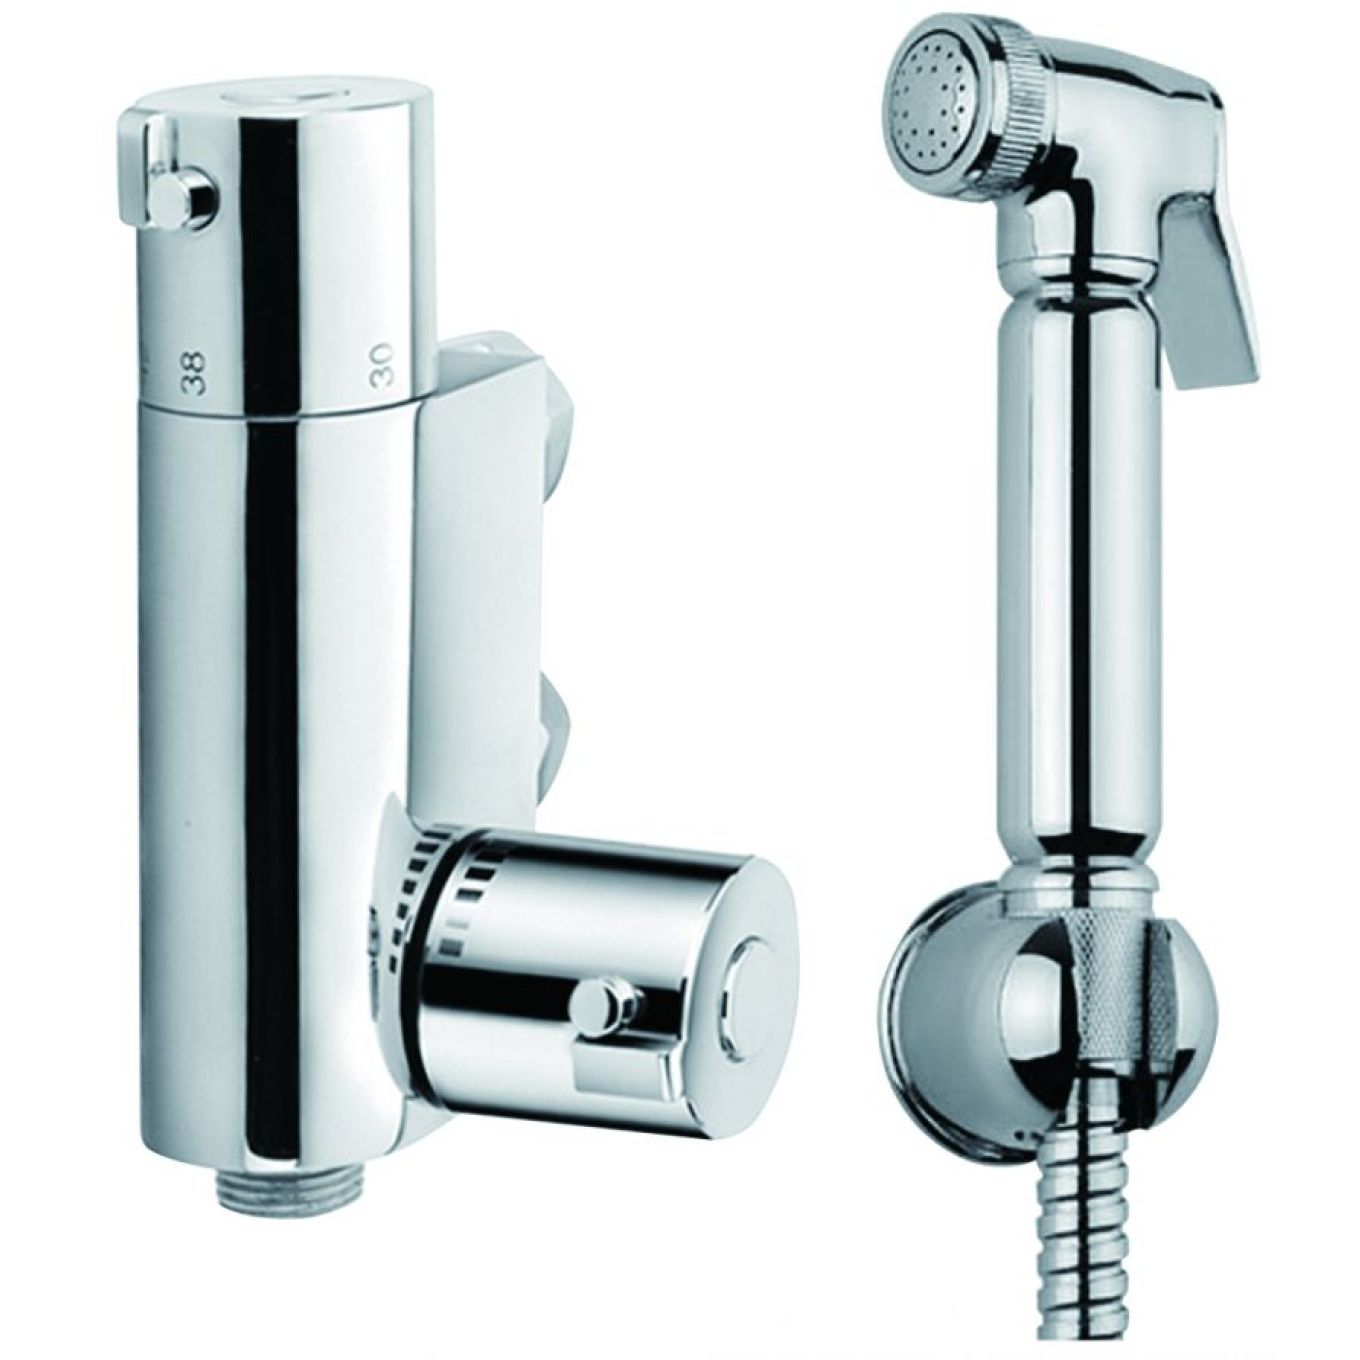 Douche With Thermostatic Mixer Valve